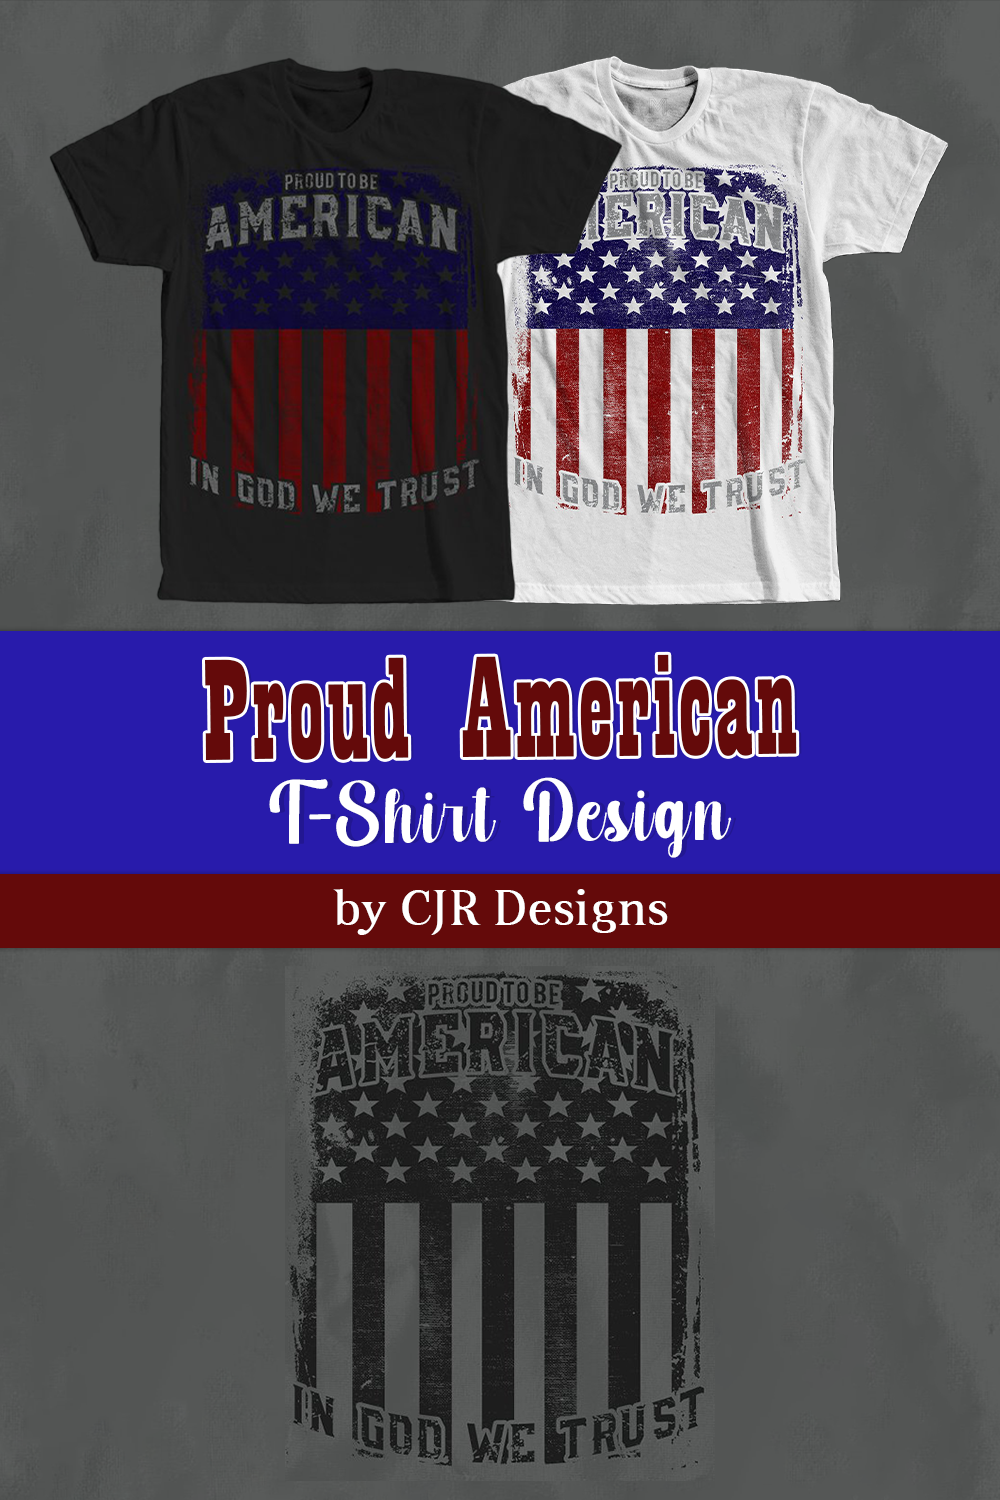 Black and white t-shirt with lovely American flag print.